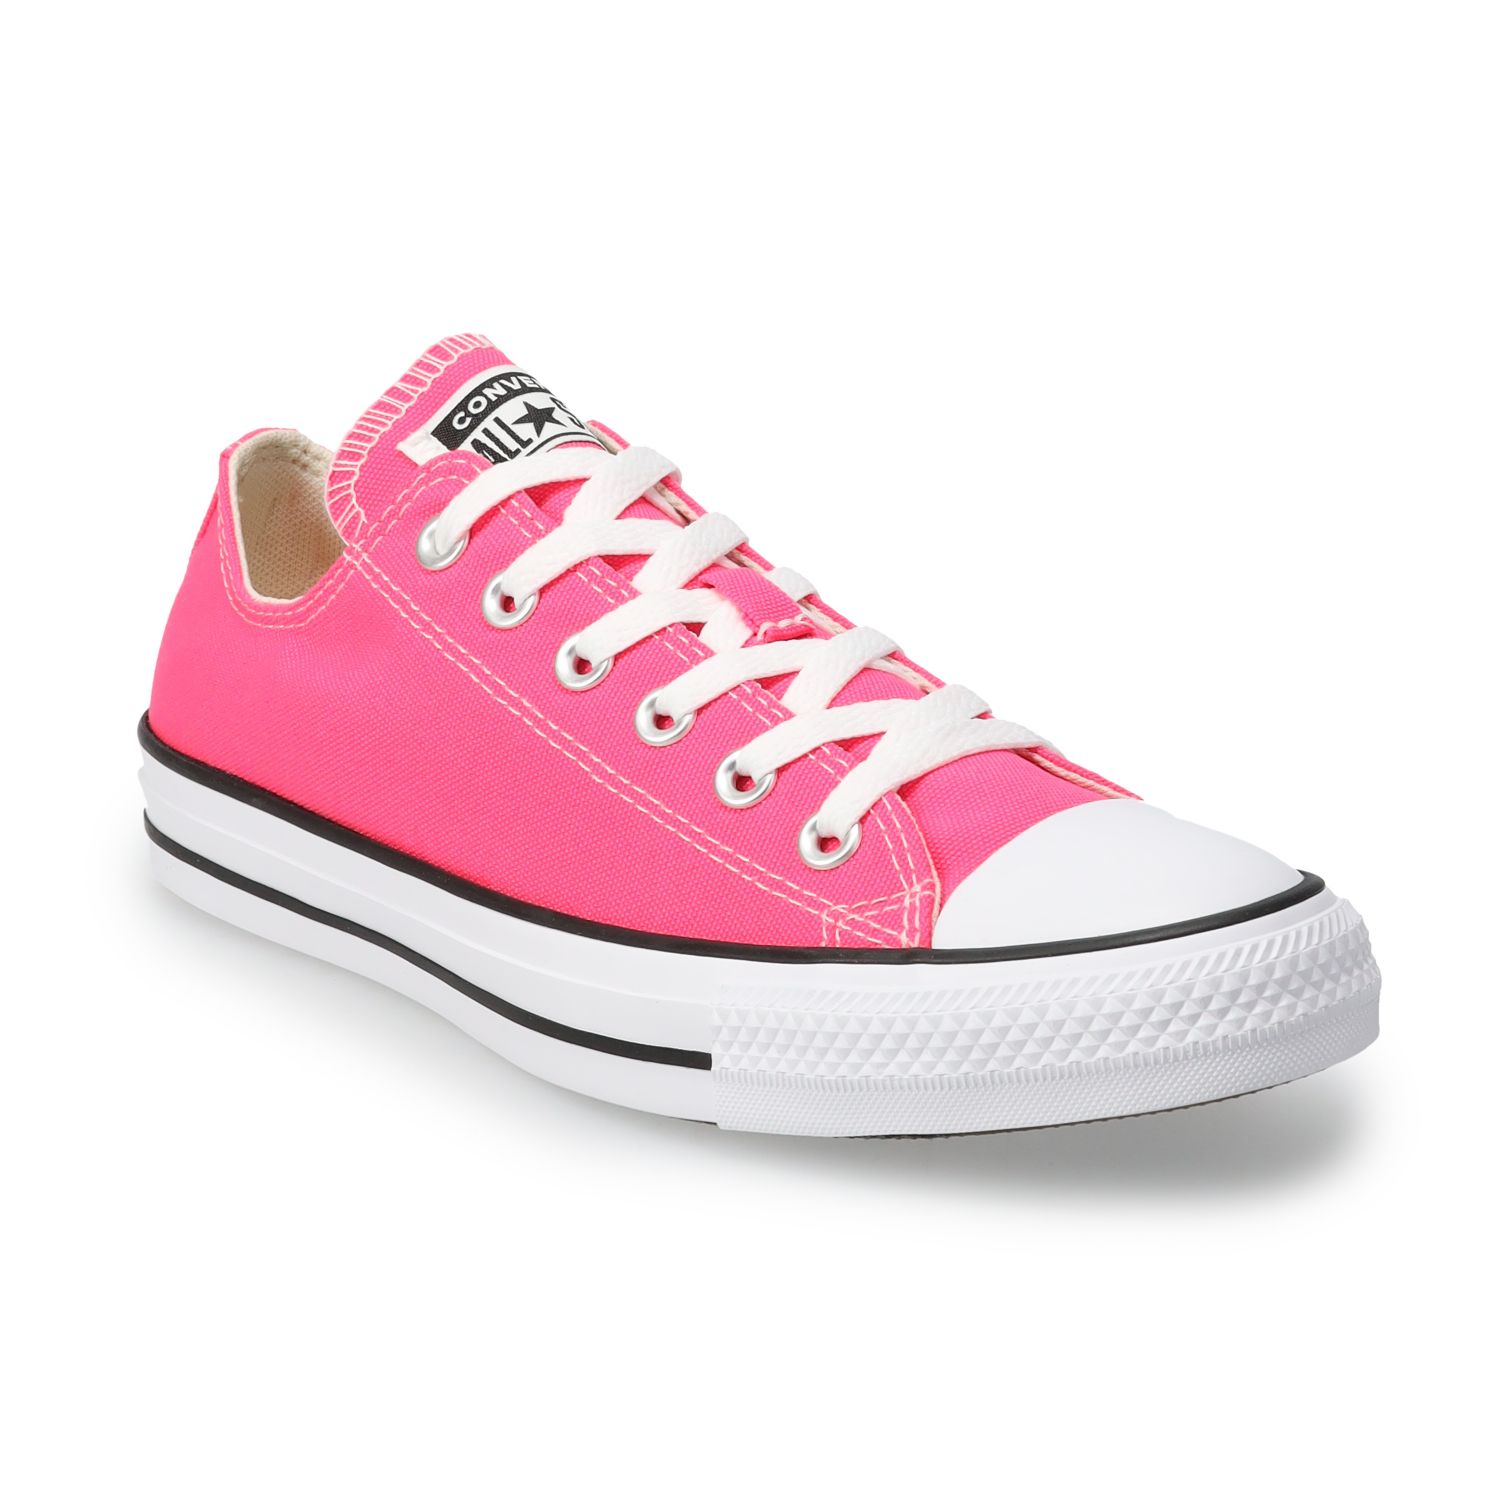 Womens Pink Converse Shoes | Kohl's